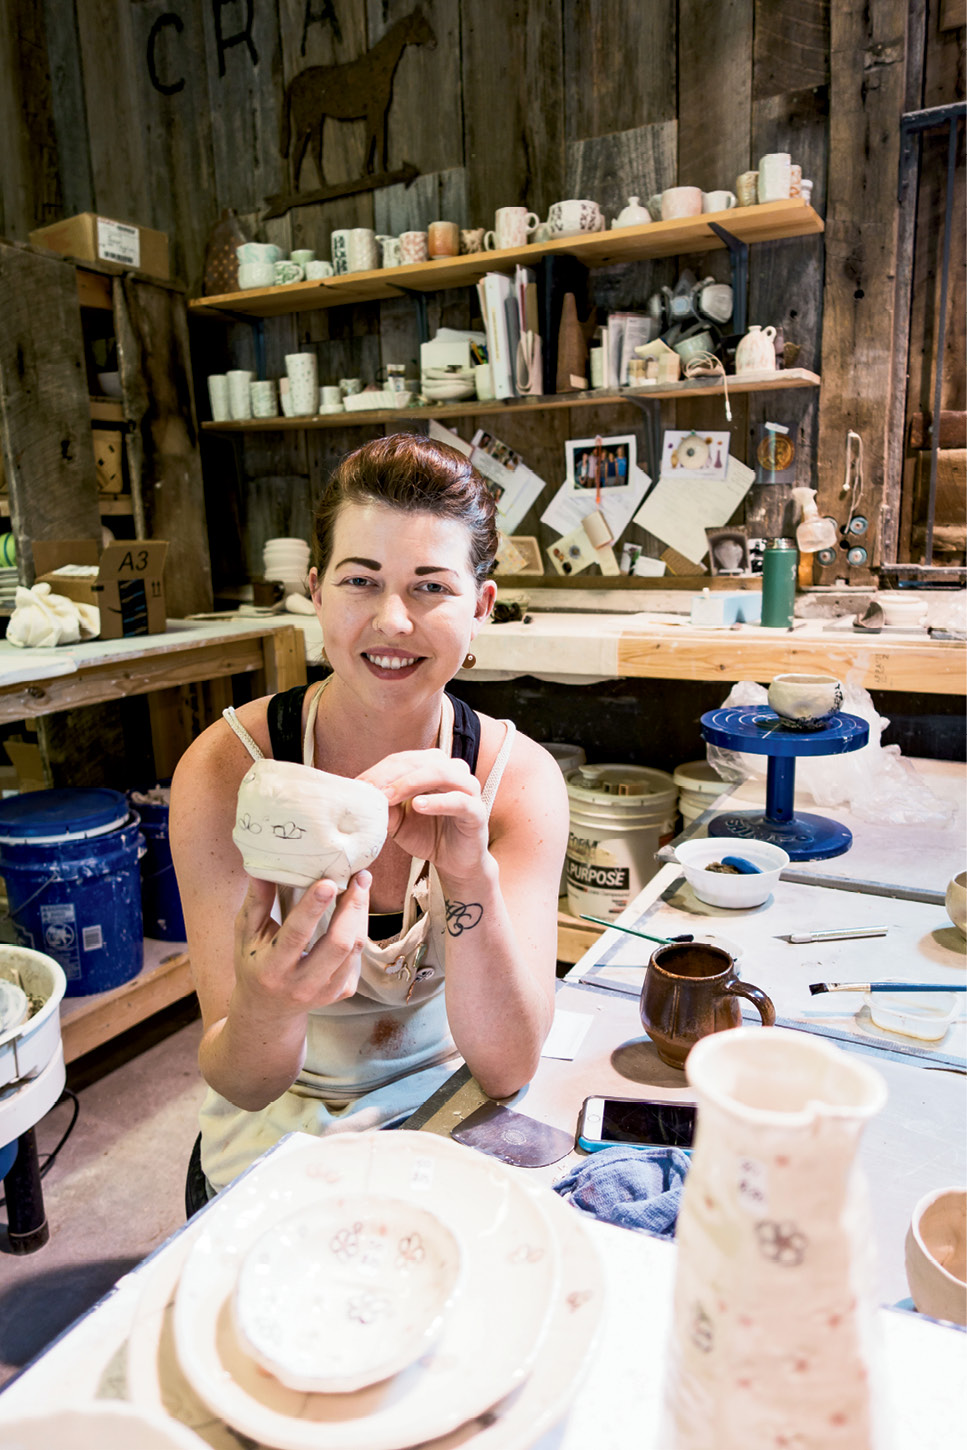 Ceramicist Samantha Oliver at work at The Bascom, a community arts center and gallery in Highlands